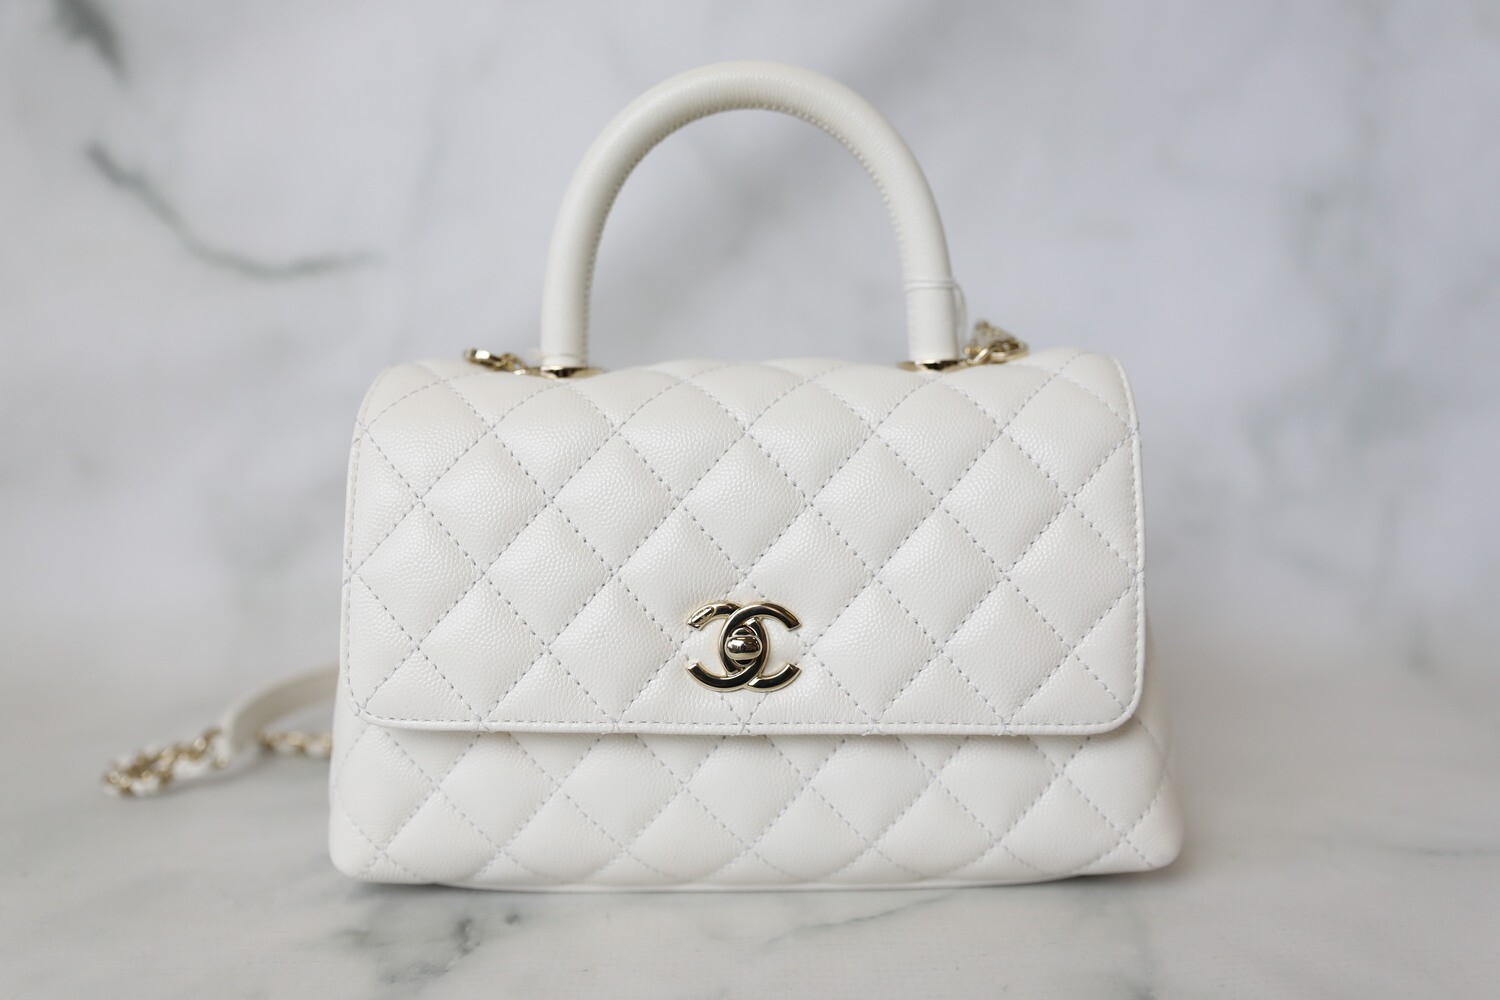 New 22A CHANEL Medium Classic Coco Handle Flap White Bag Champagne Gold HWR  CHIP